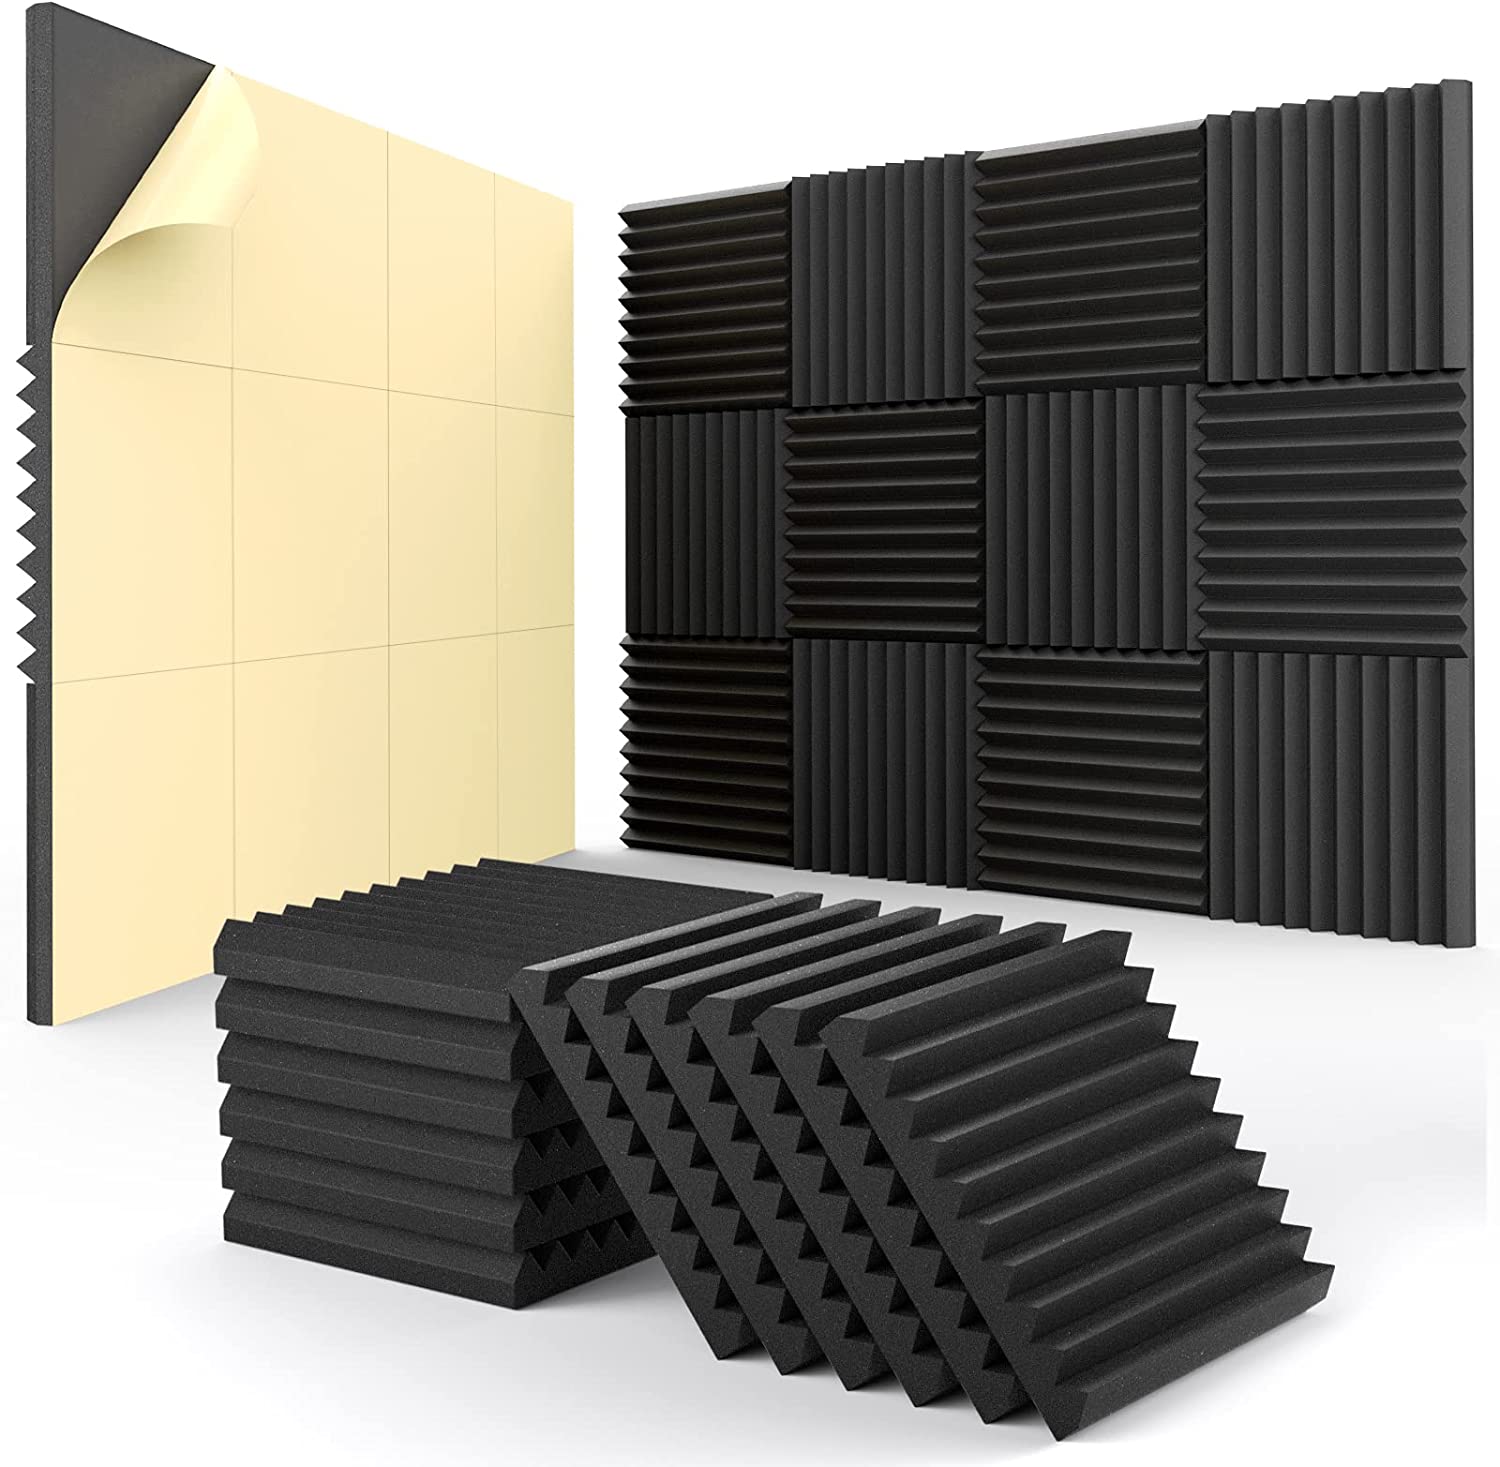 BXI Soundproofing Closed Cell Foam - 2 Pack Self-Adhesive 16'' X 12'' X  1.8'' Thickened Egg Crate Sound Proof Foam - Acoustic Foam Panels Great for